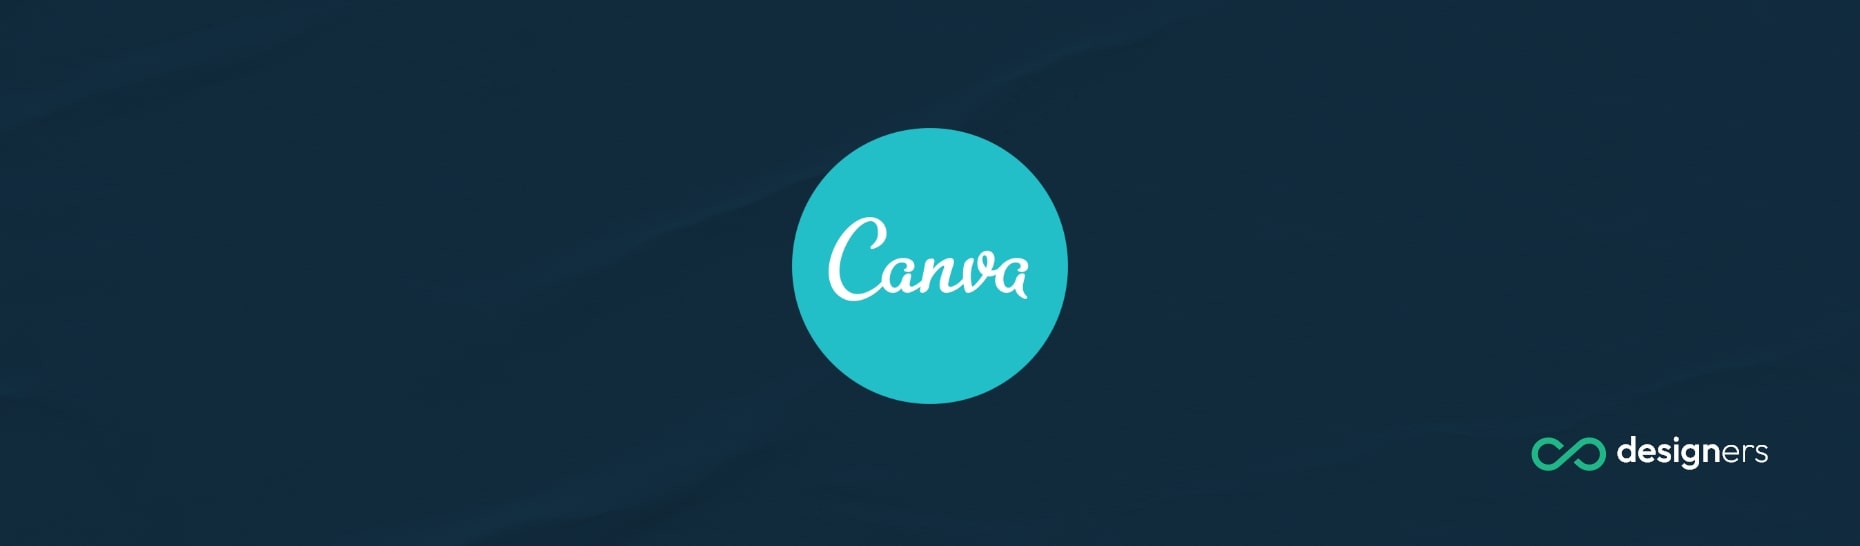 Is Canva Good for Ecommerce?